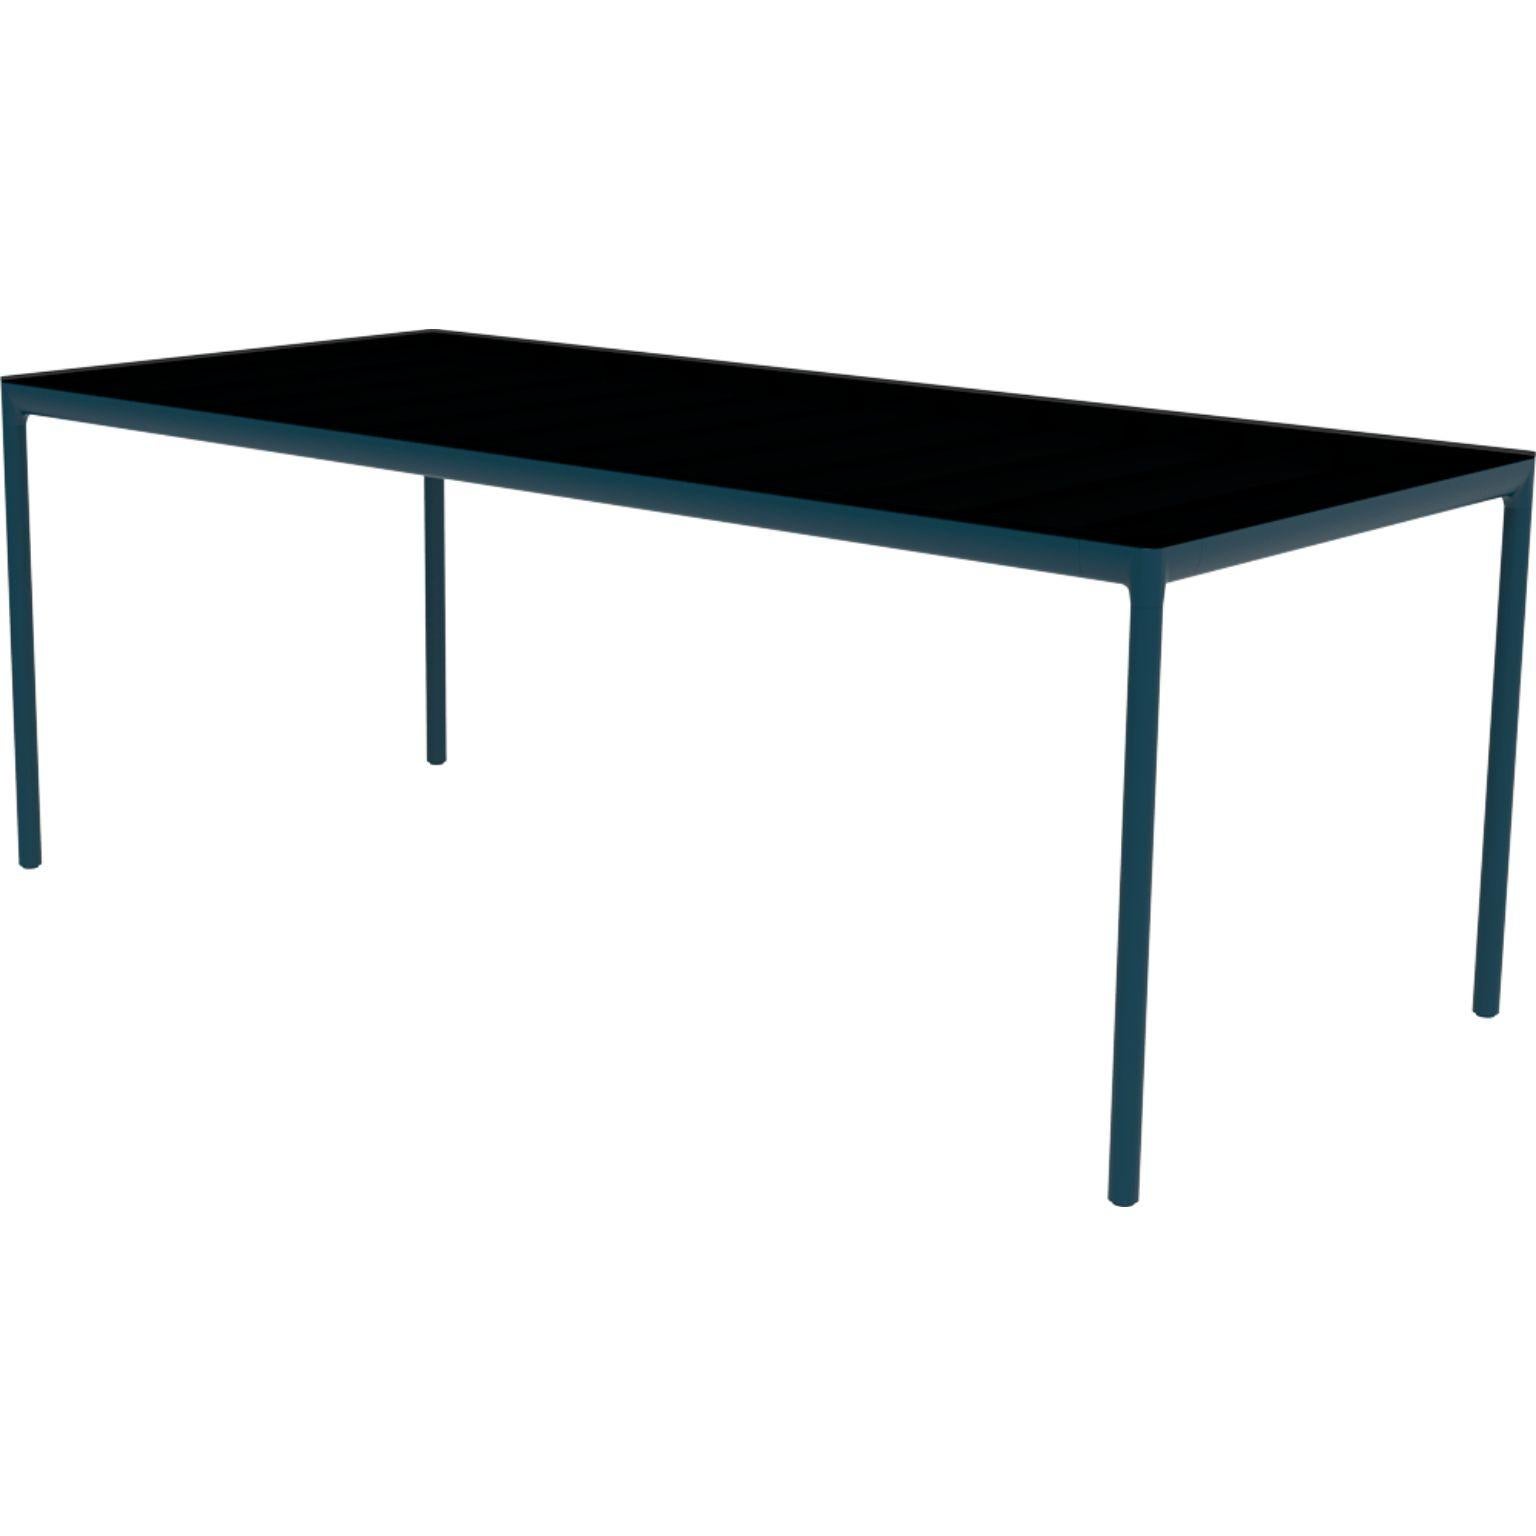 Ribbons Navy 200 Coffee Table by MOWEE
Dimensions: D90 x W200 x H75 cm.
Material: aluminum and HPL top.
Weight: 25 kg.
Also available in different colors and finishes. (HPL Black Edge or Neolith top). 

An unmistakable collection for its